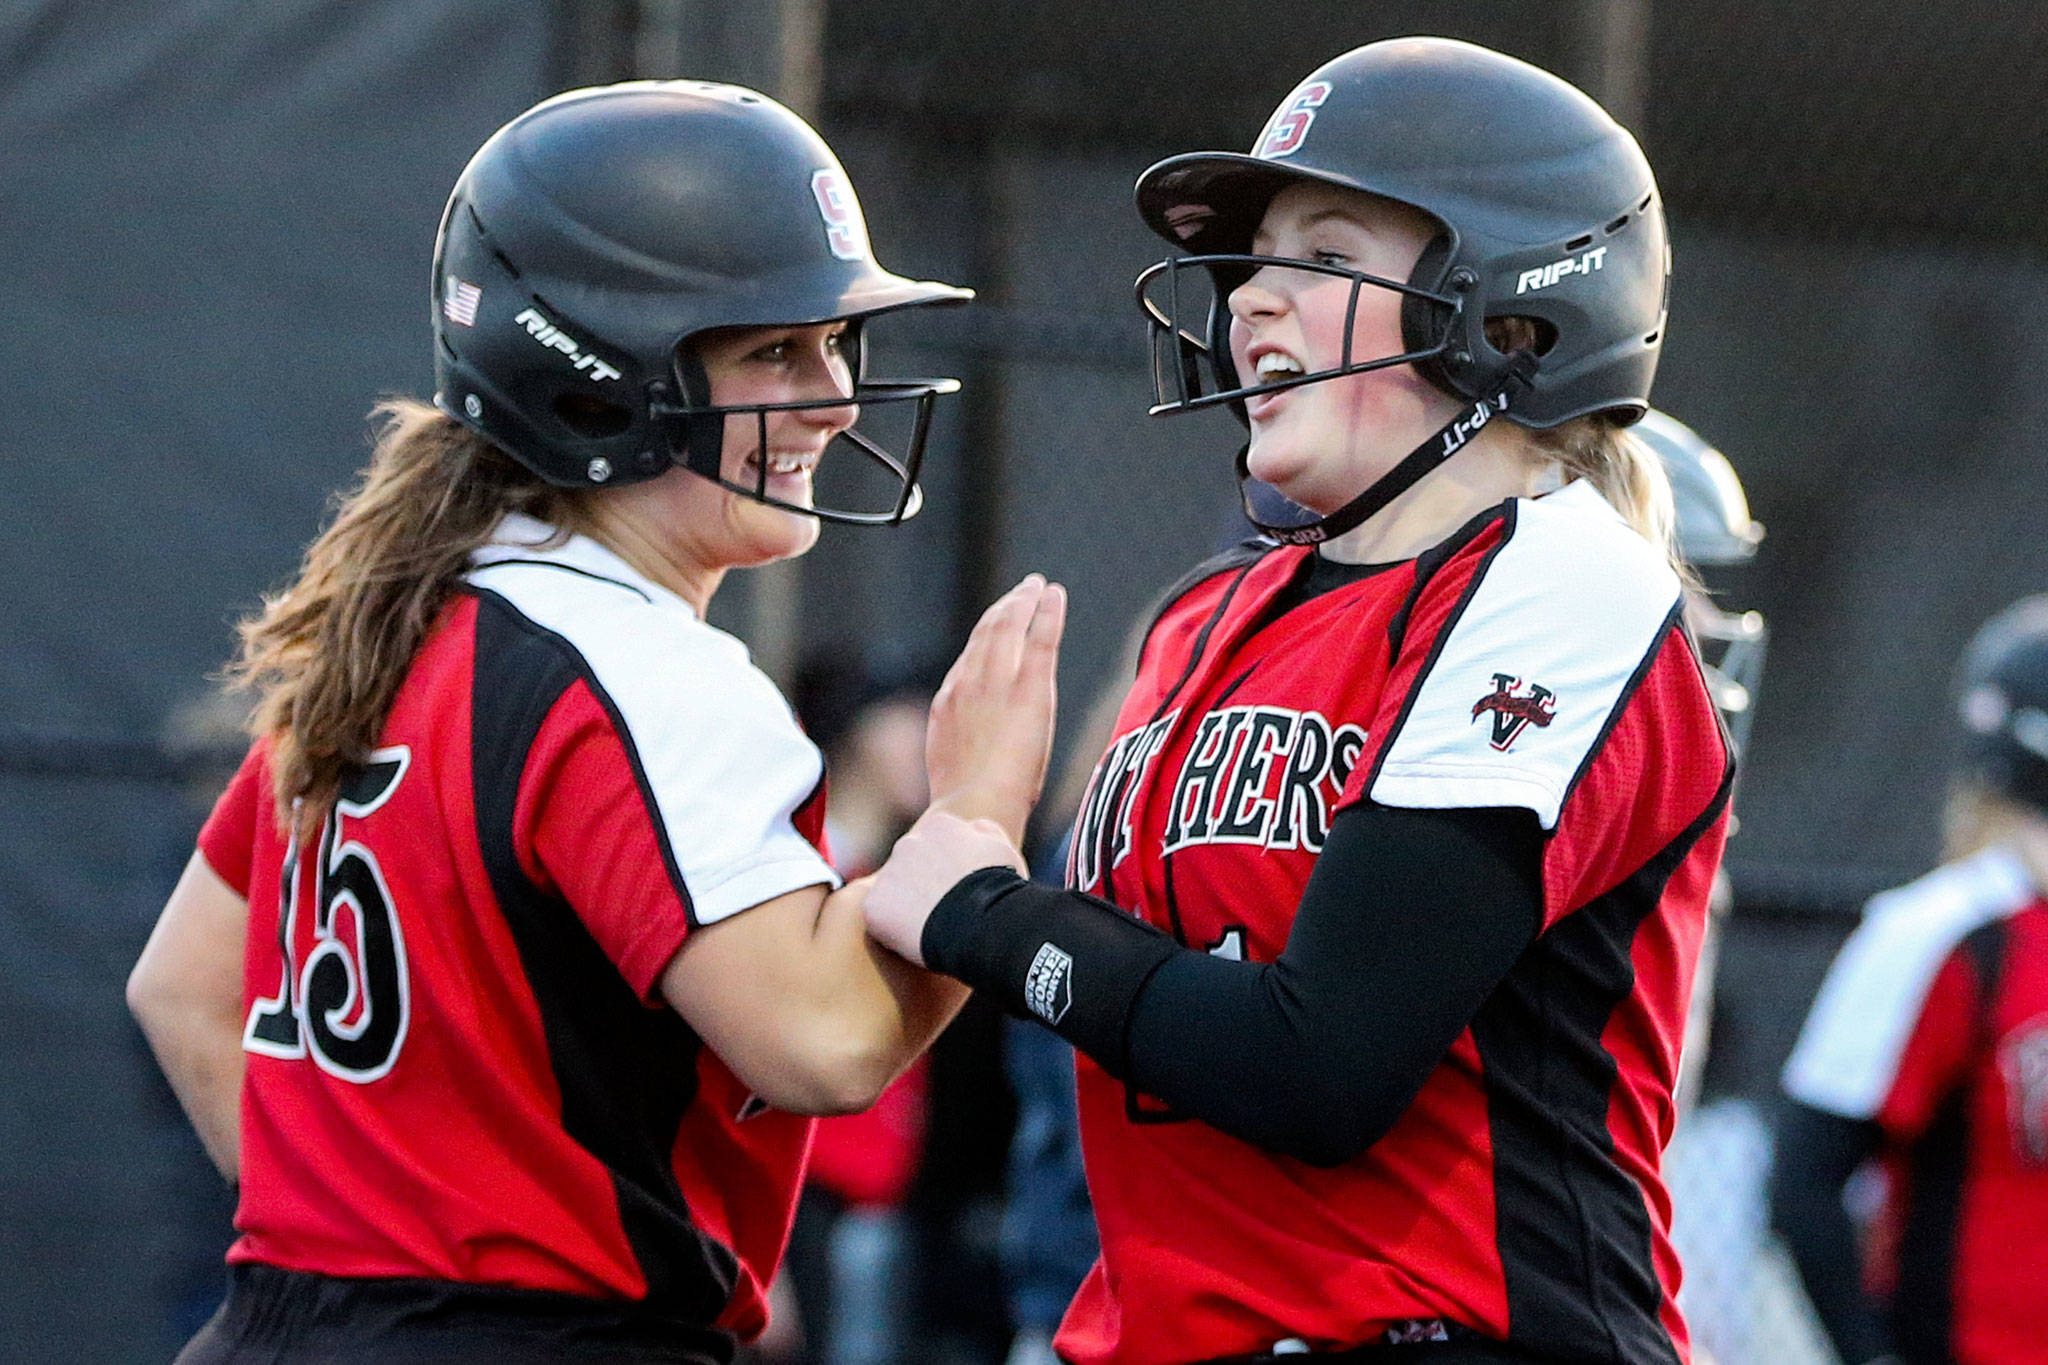 Anna Robinson (left) and Delaney Kaysner celebrate after scoring during Snohomish’s 10-run fourth inning. The visiting Panthers rolled to a 13-3 win over Monroe in five innings Wednesday night. (Kevin Clark / The Herald)